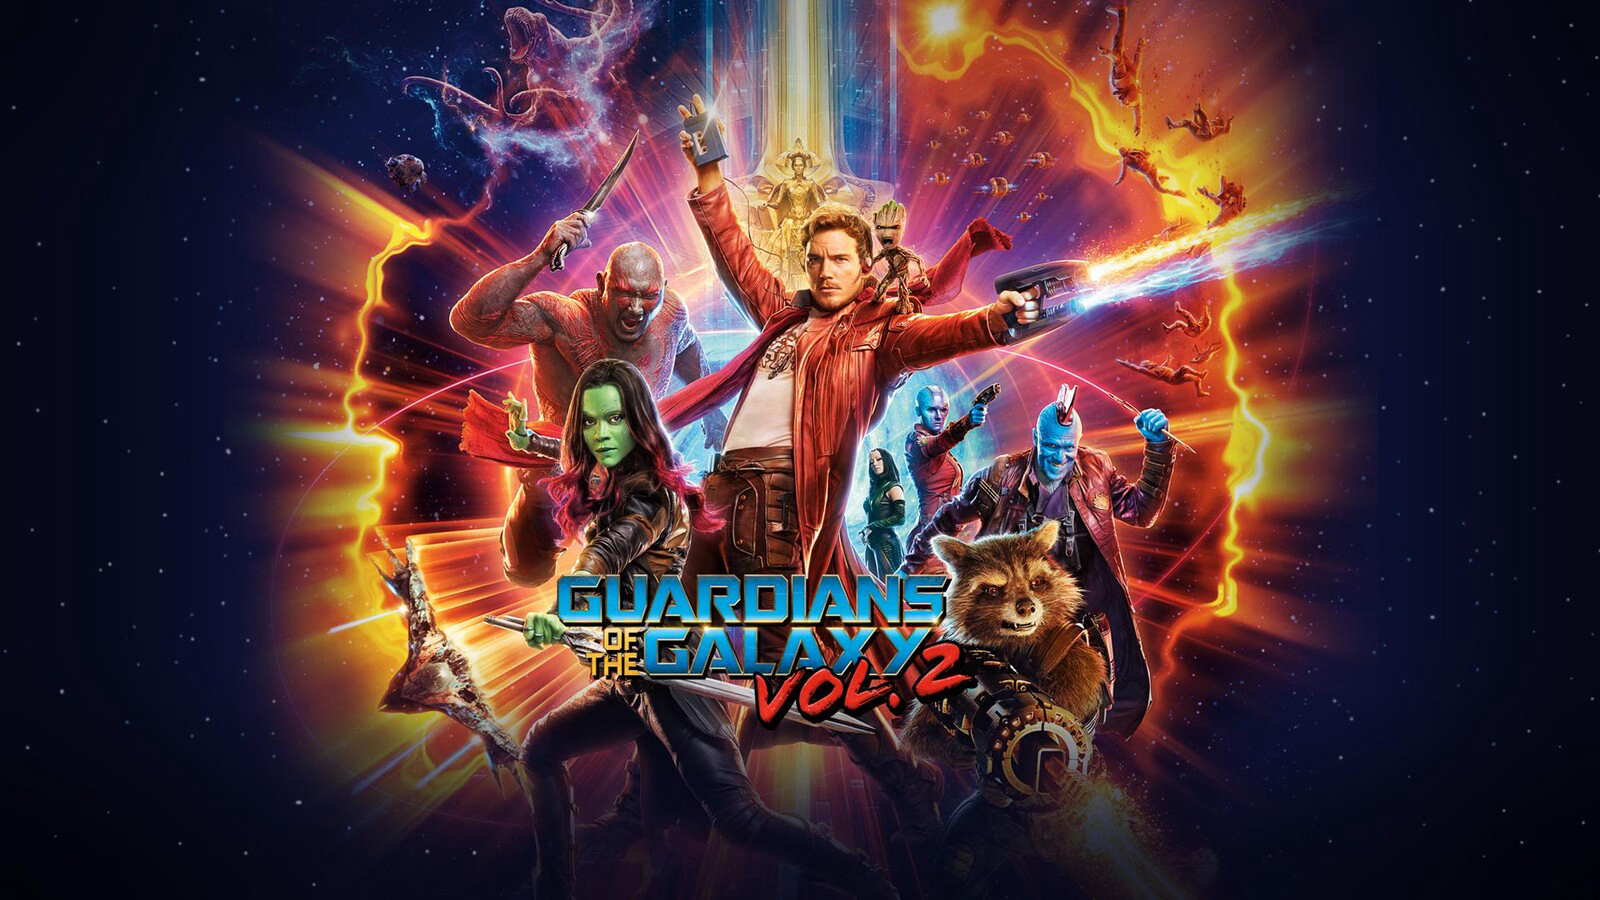 Guardians of the Galaxy Vol. 2 / Guardians of the Galaxy Vol. 2 (2017)